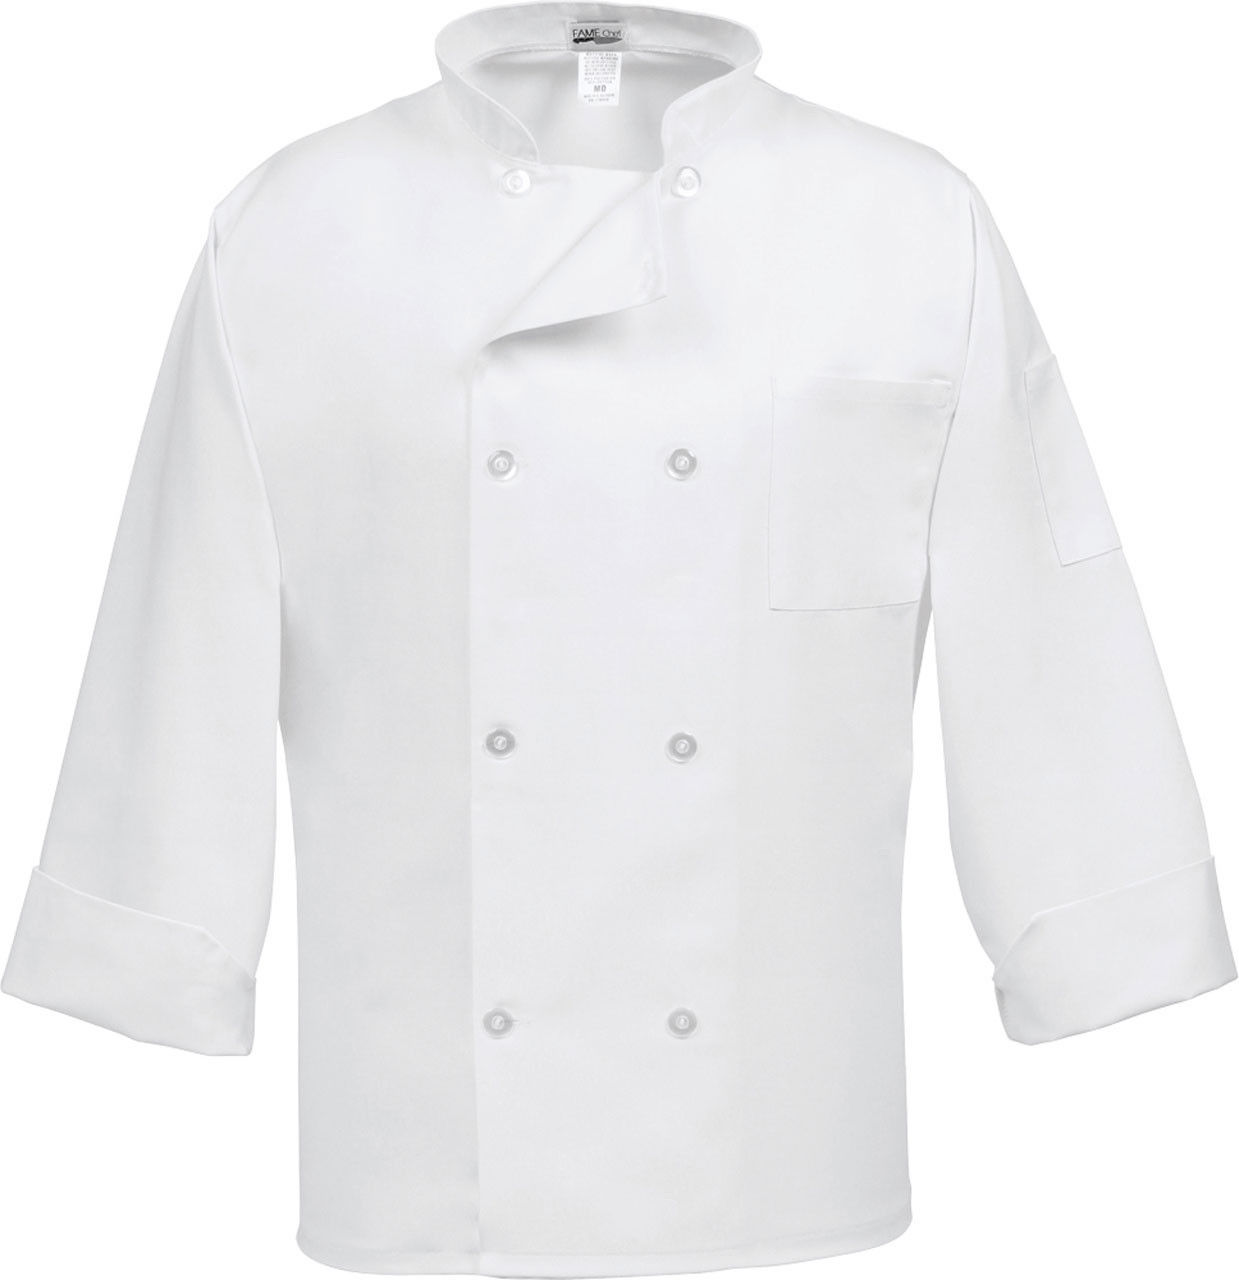 What is the button count and material on the button coat for chefs?